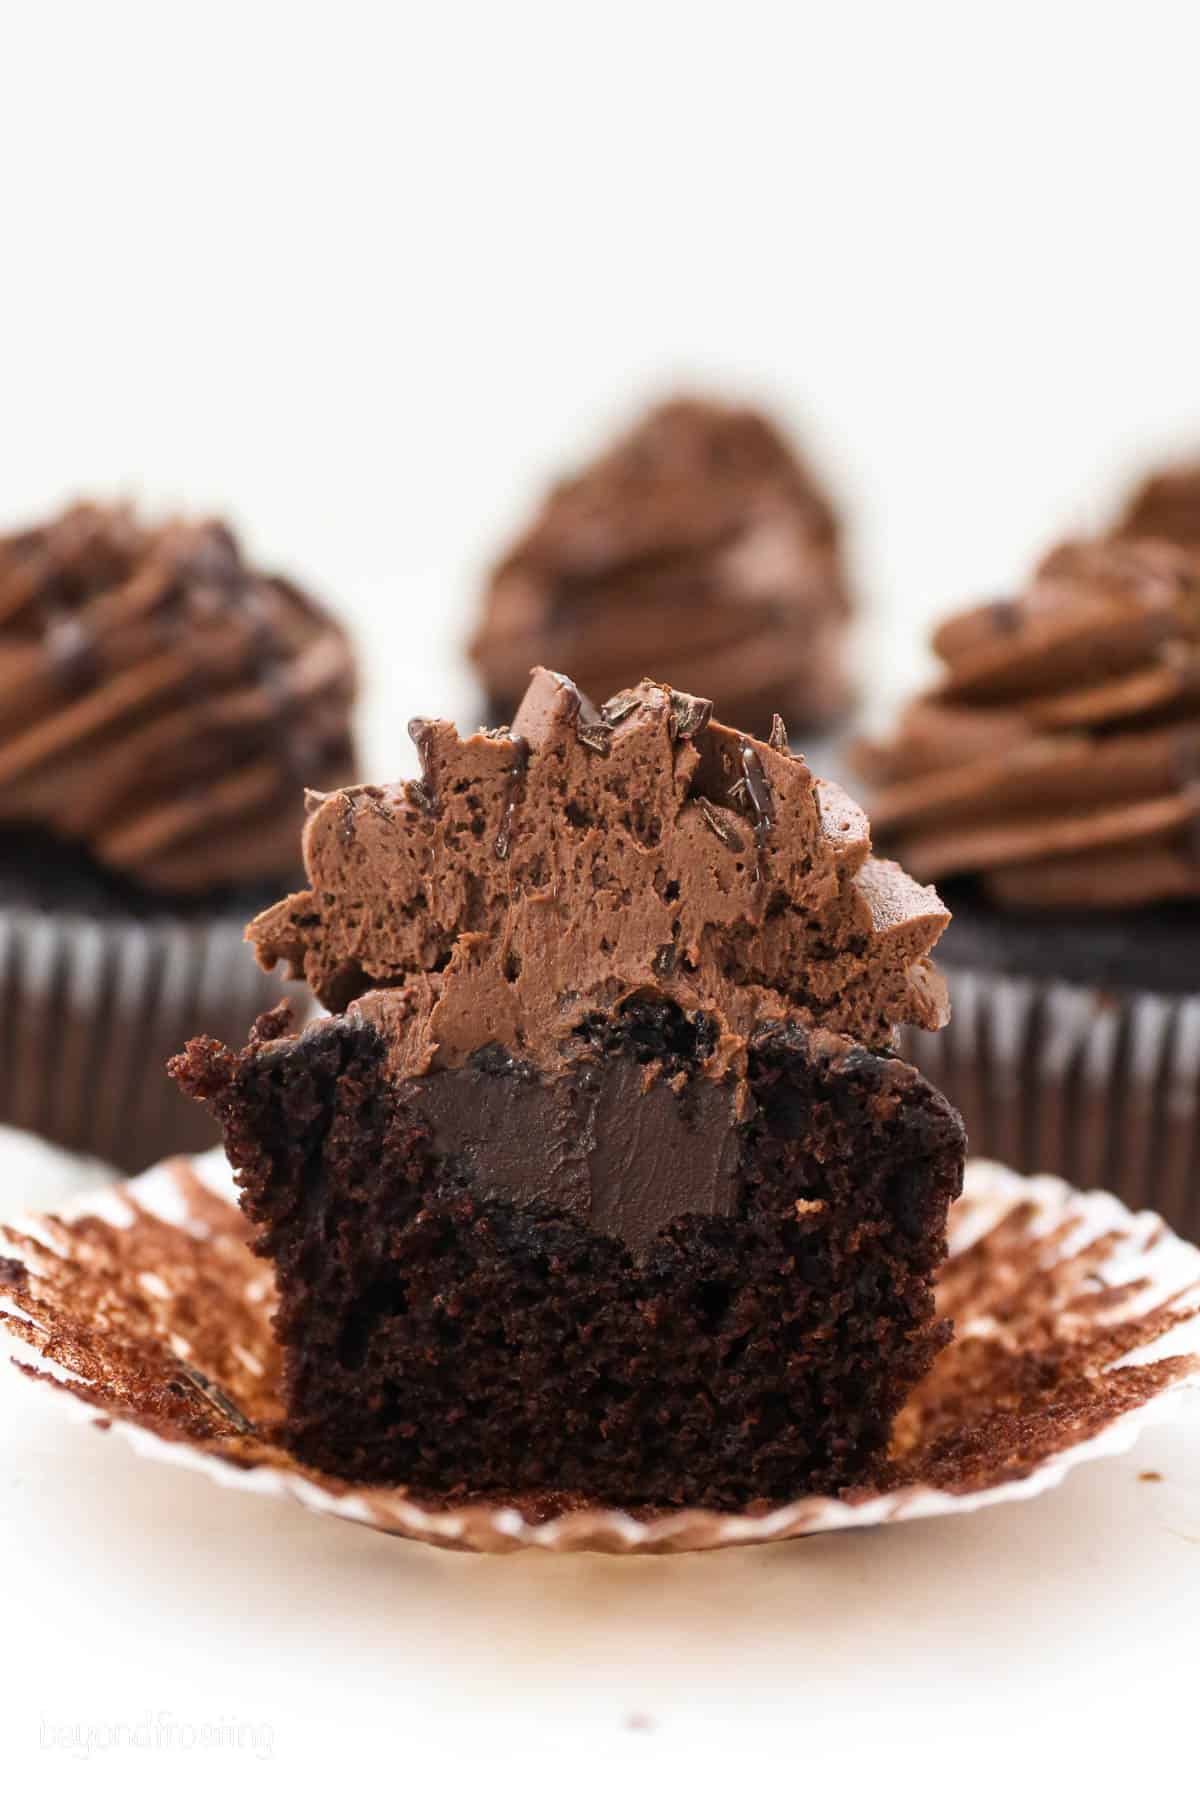 A frosted chocolate cupcake cut in half to reveal the chocolate ganache filling.